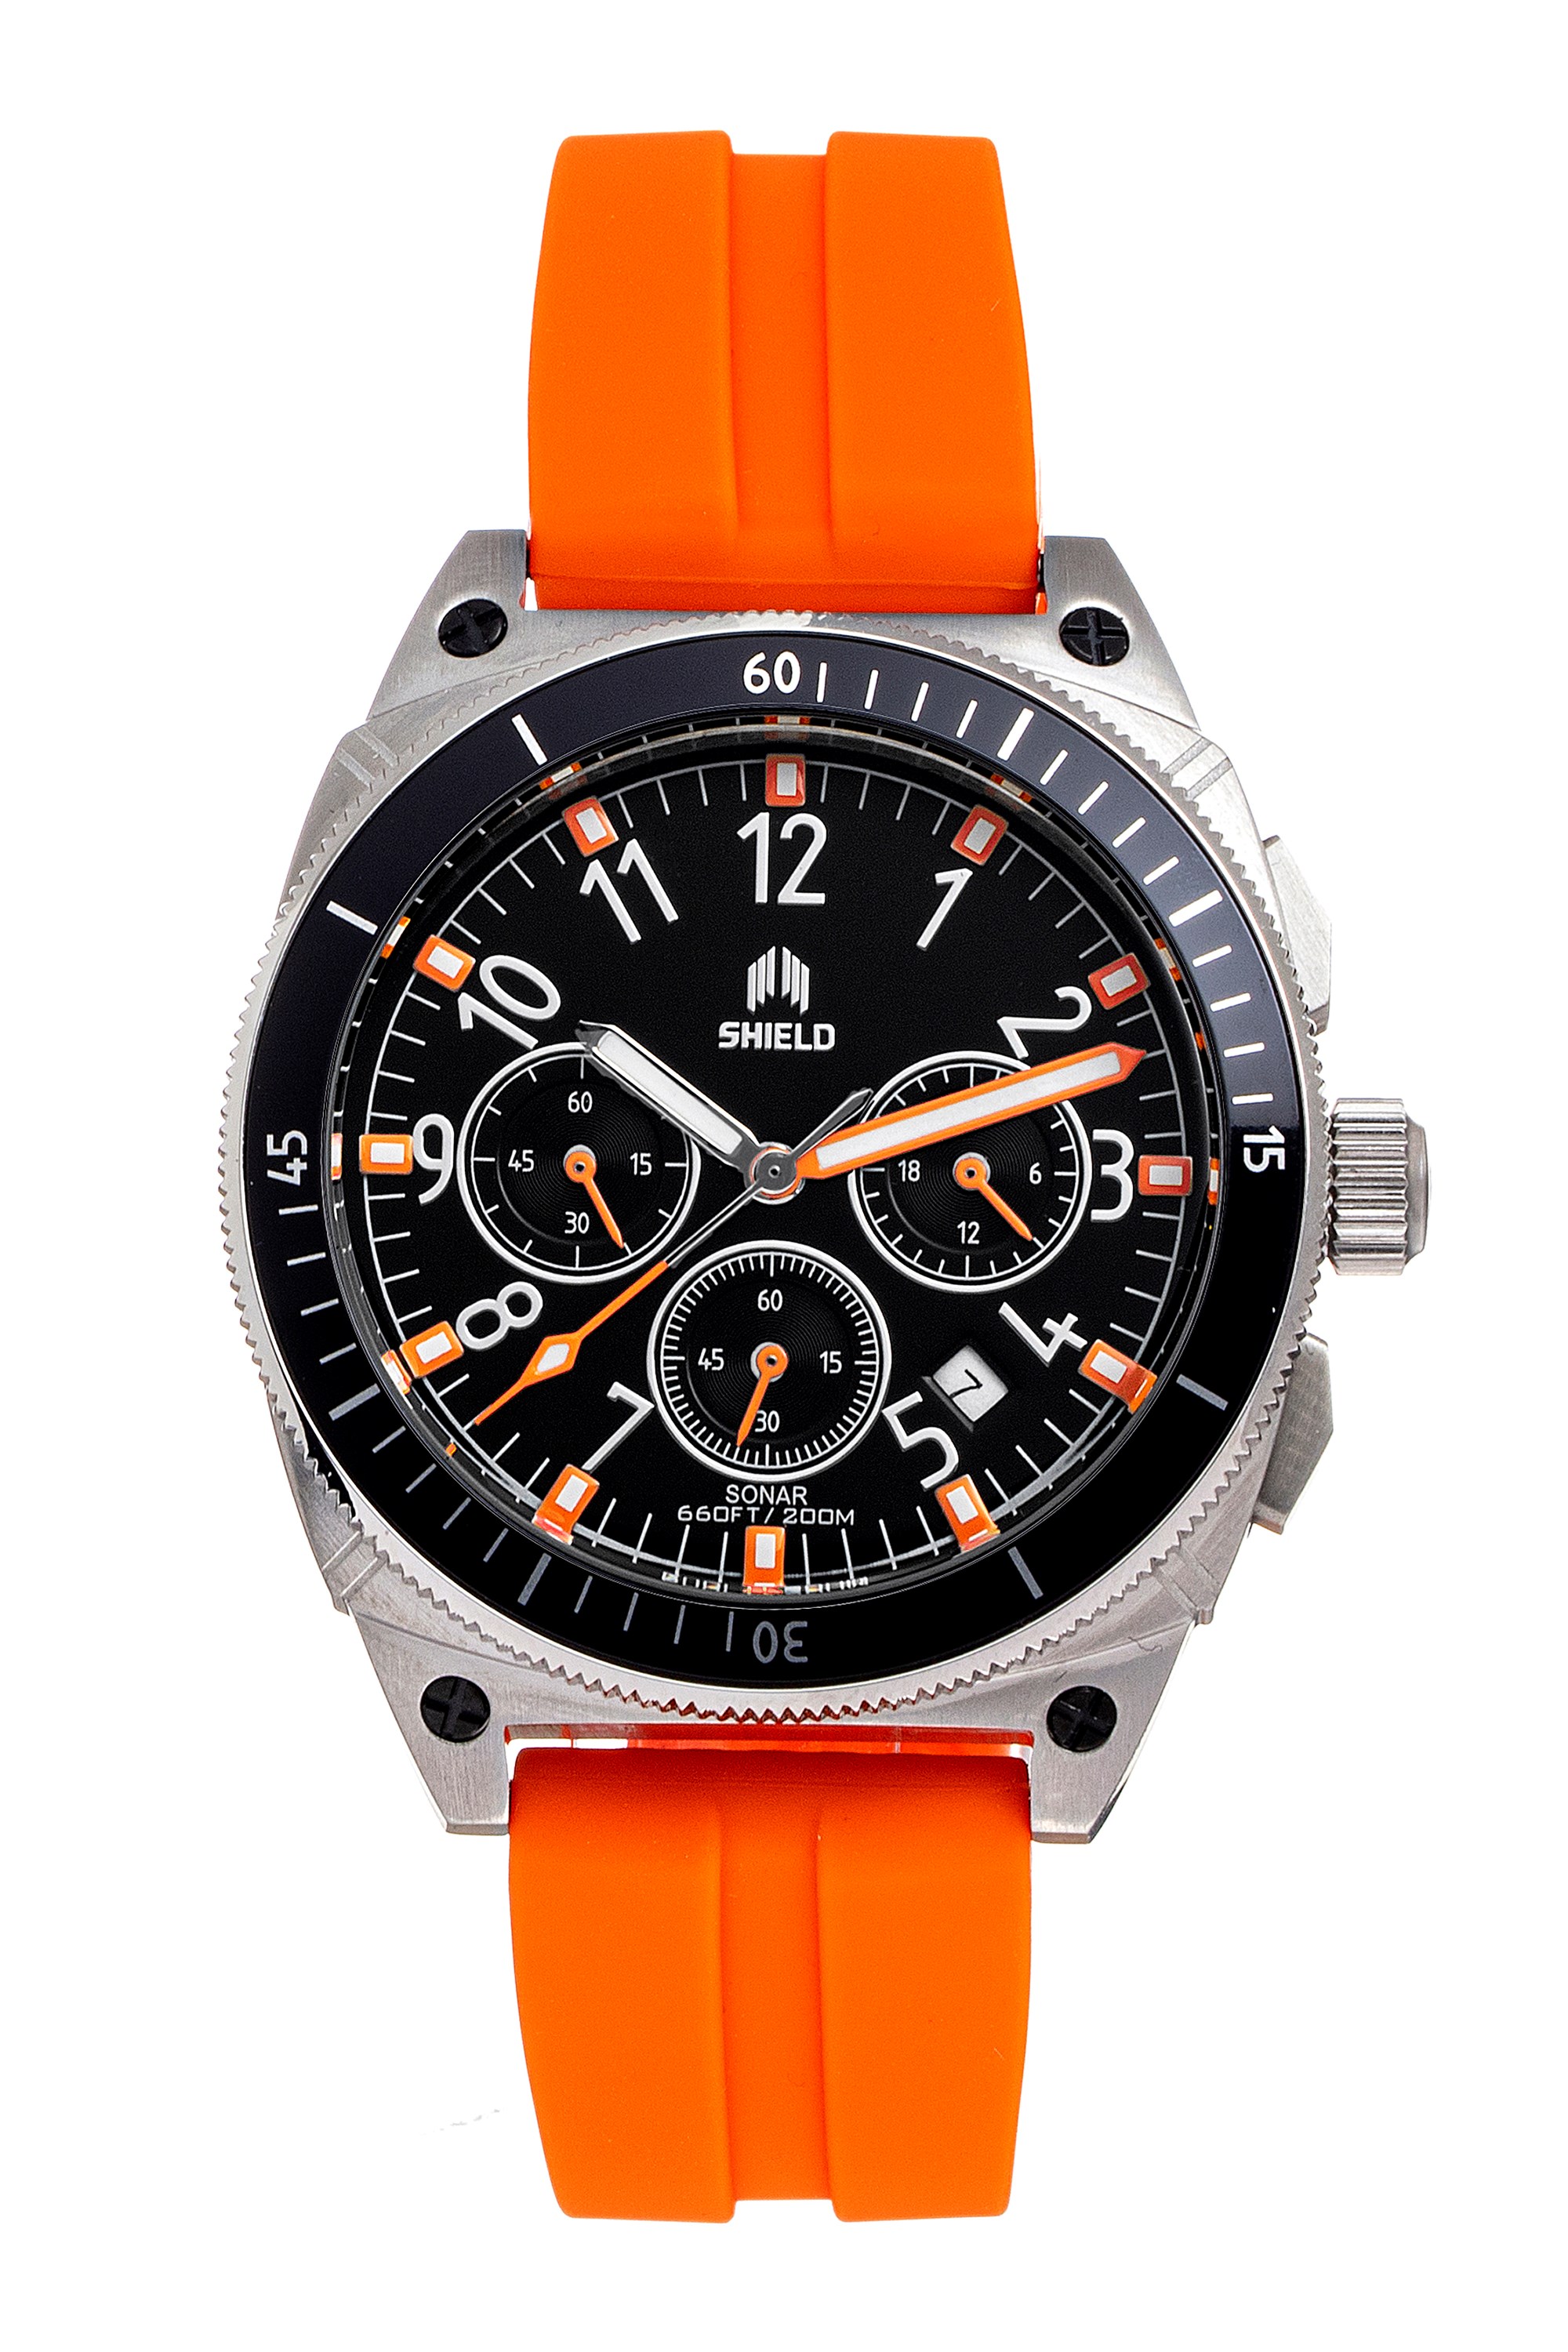 Warehouse　Sonar　Strap　Mountain　with　Chronograph　Date　Watch　GB